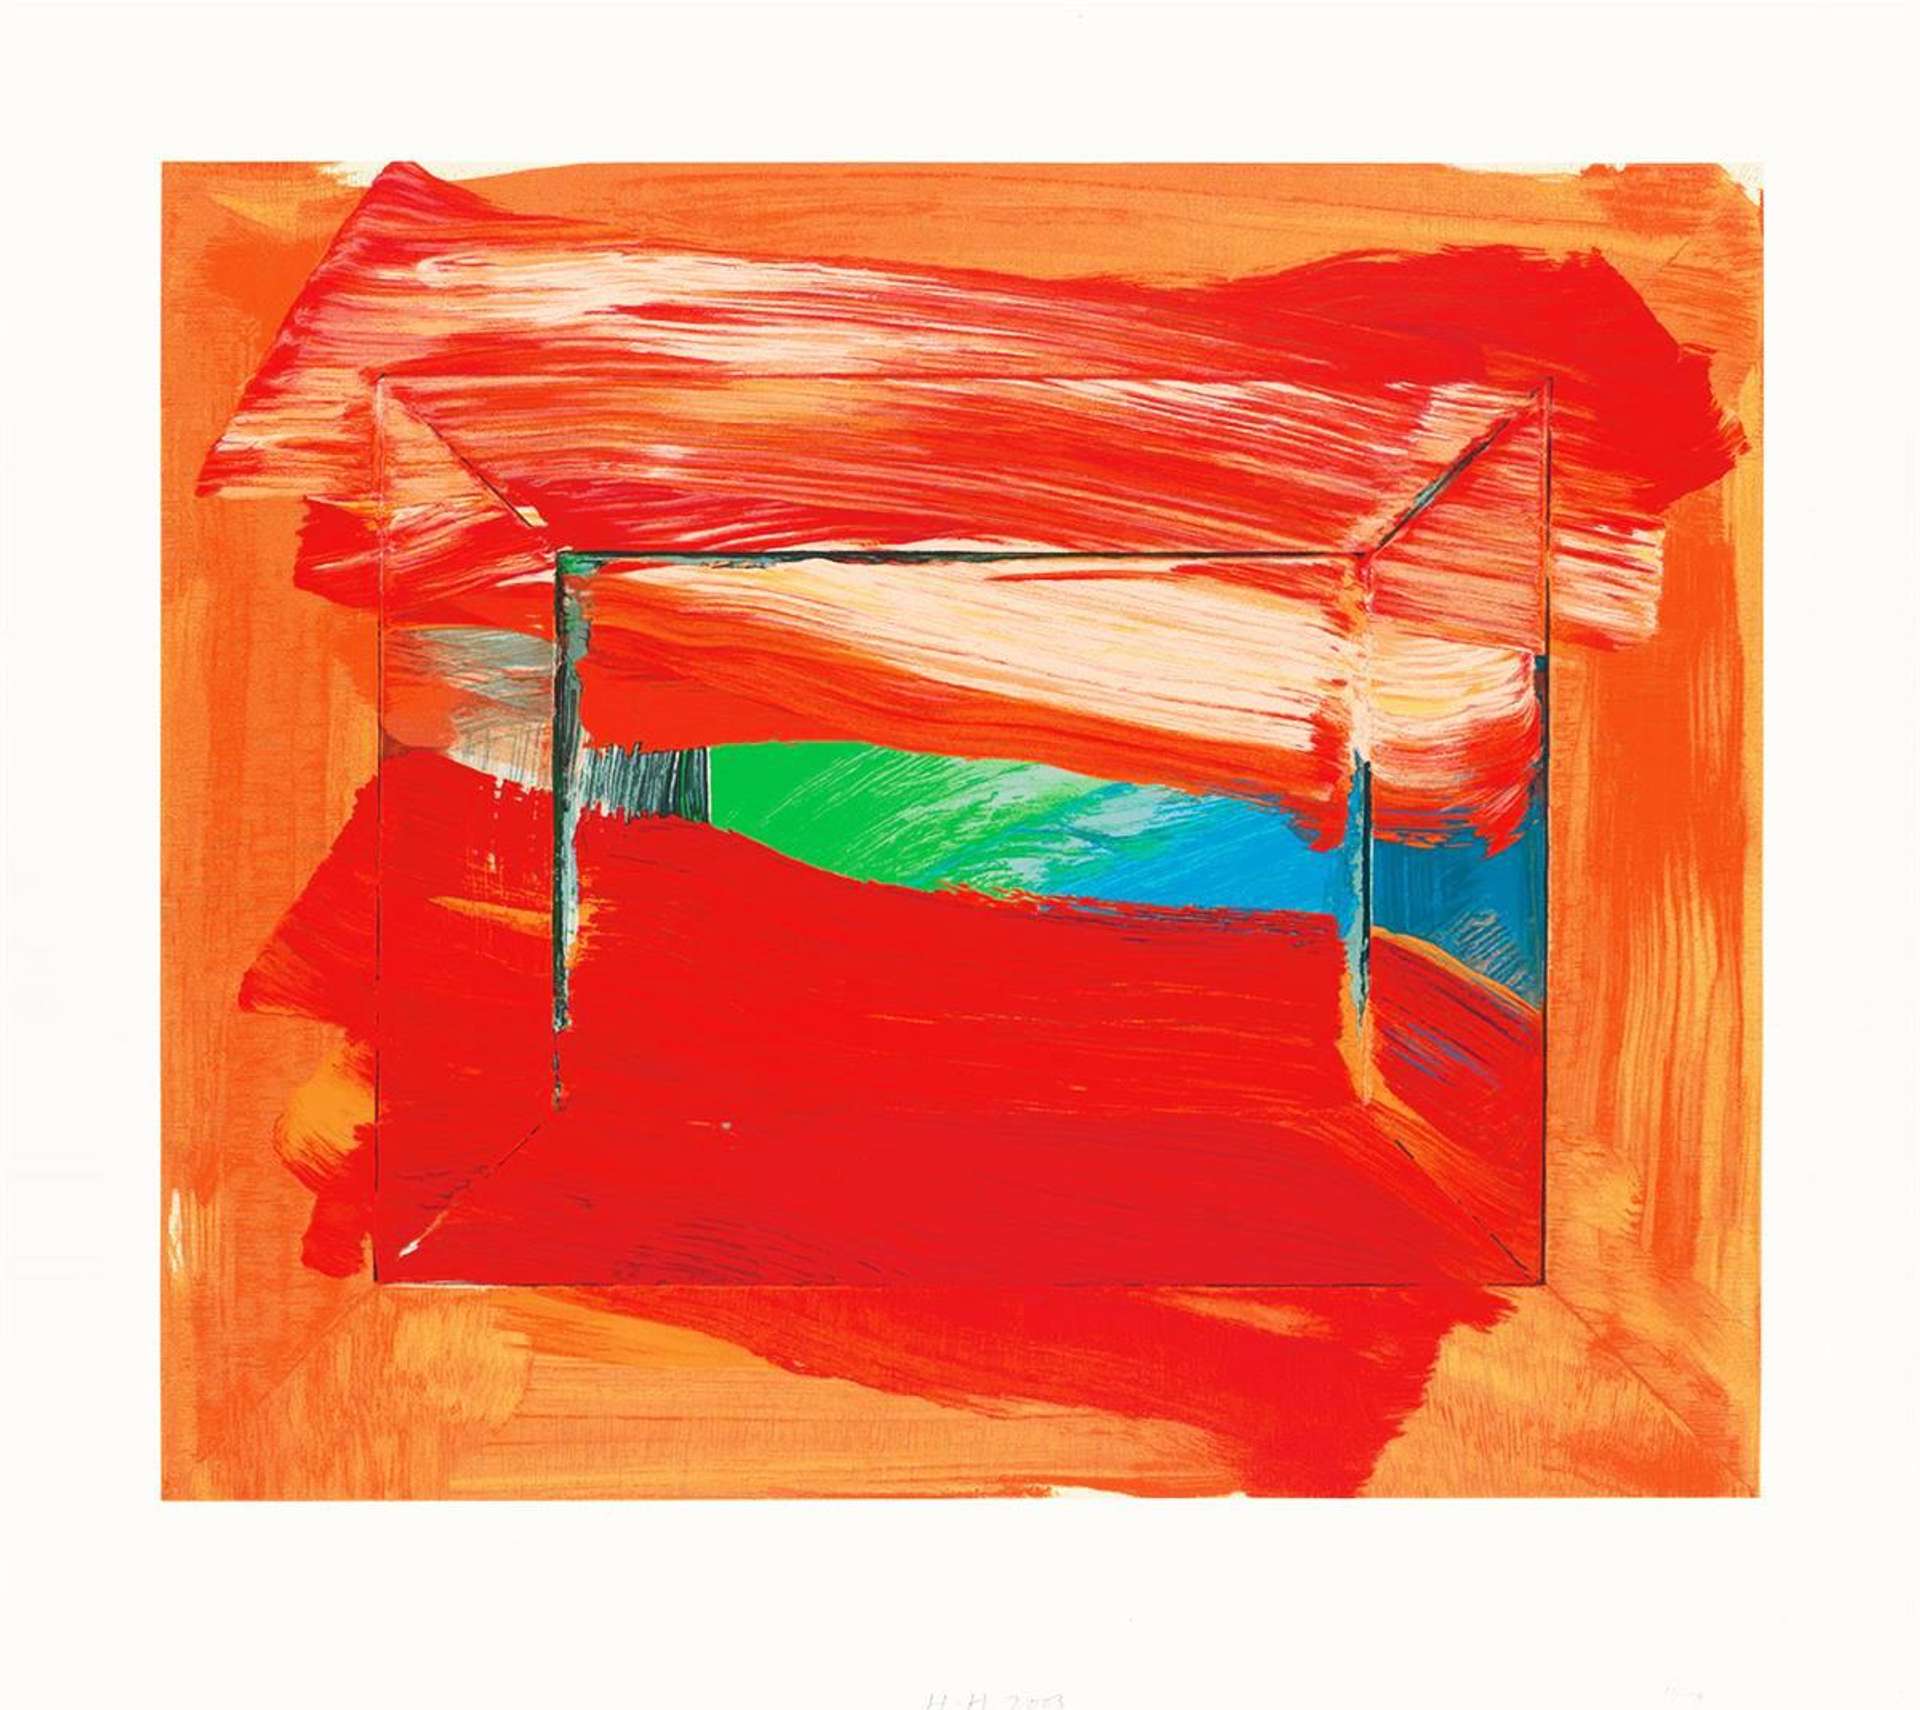 Under The Hammer: Top Prices Paid For Howard Hodgkin At Auction